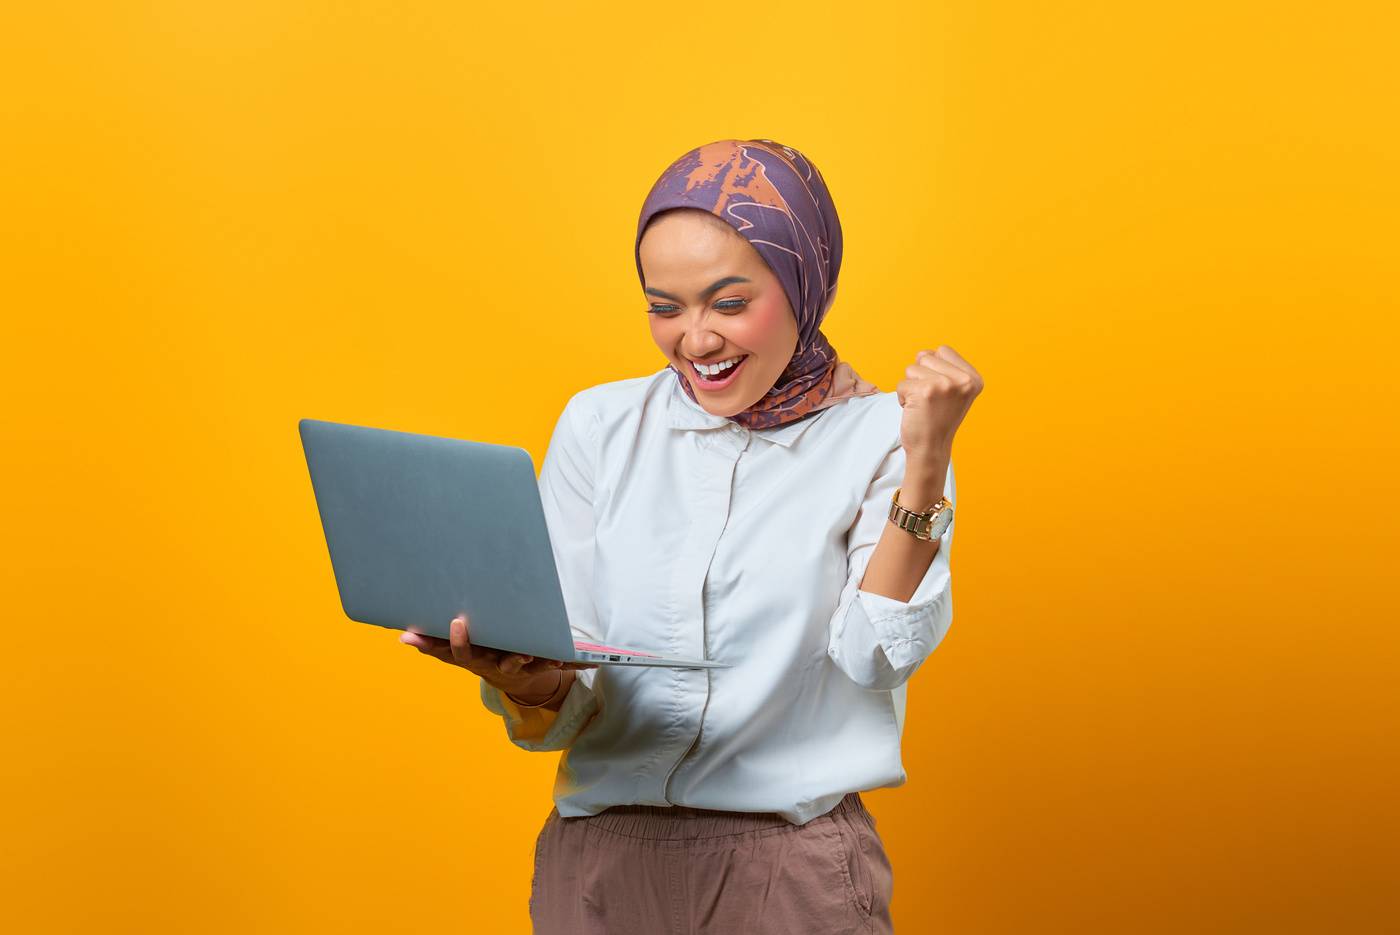 Portrait of Excited Asian Woman Holding Laptop over Yellow Backg